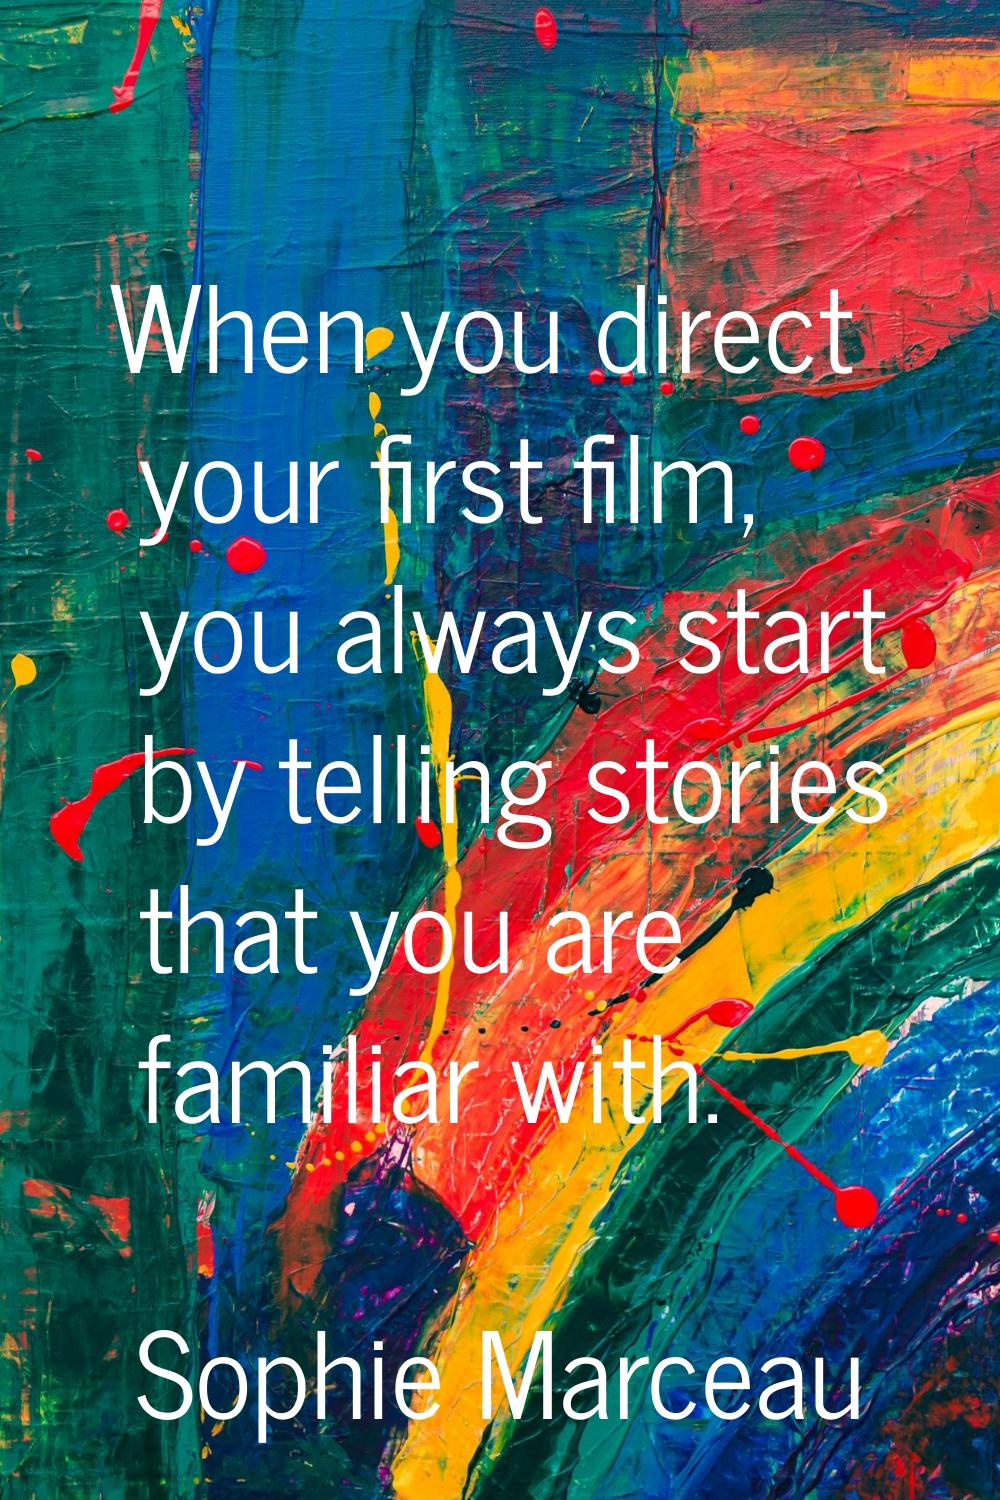 When you direct your first film, you always start by telling stories that you are familiar with.